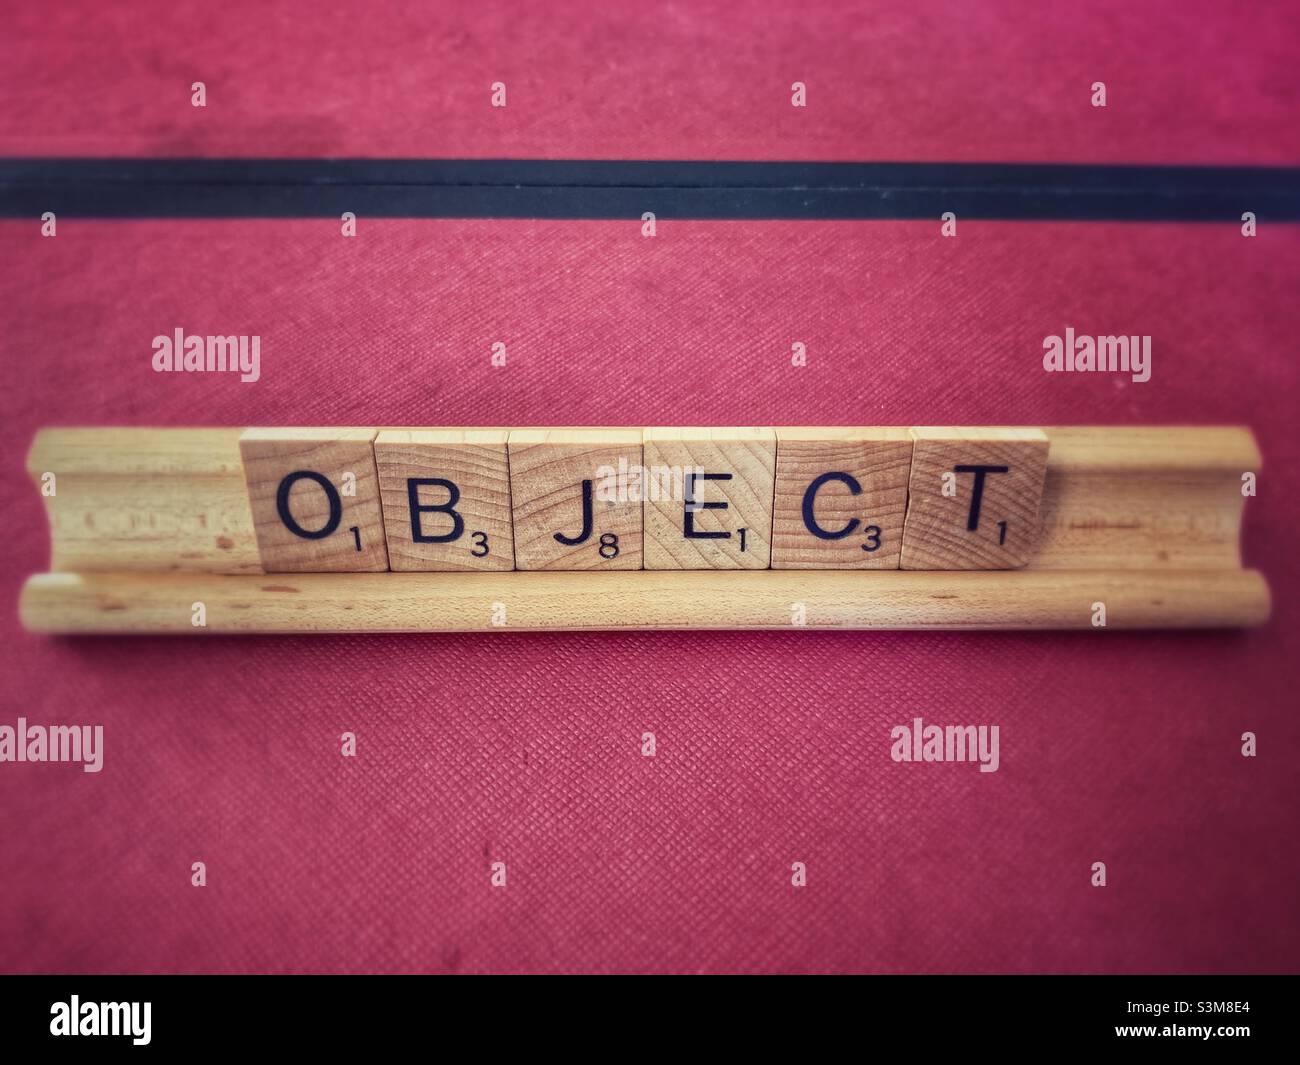 Scrabble letters object, against dark pink background. Stock Photo